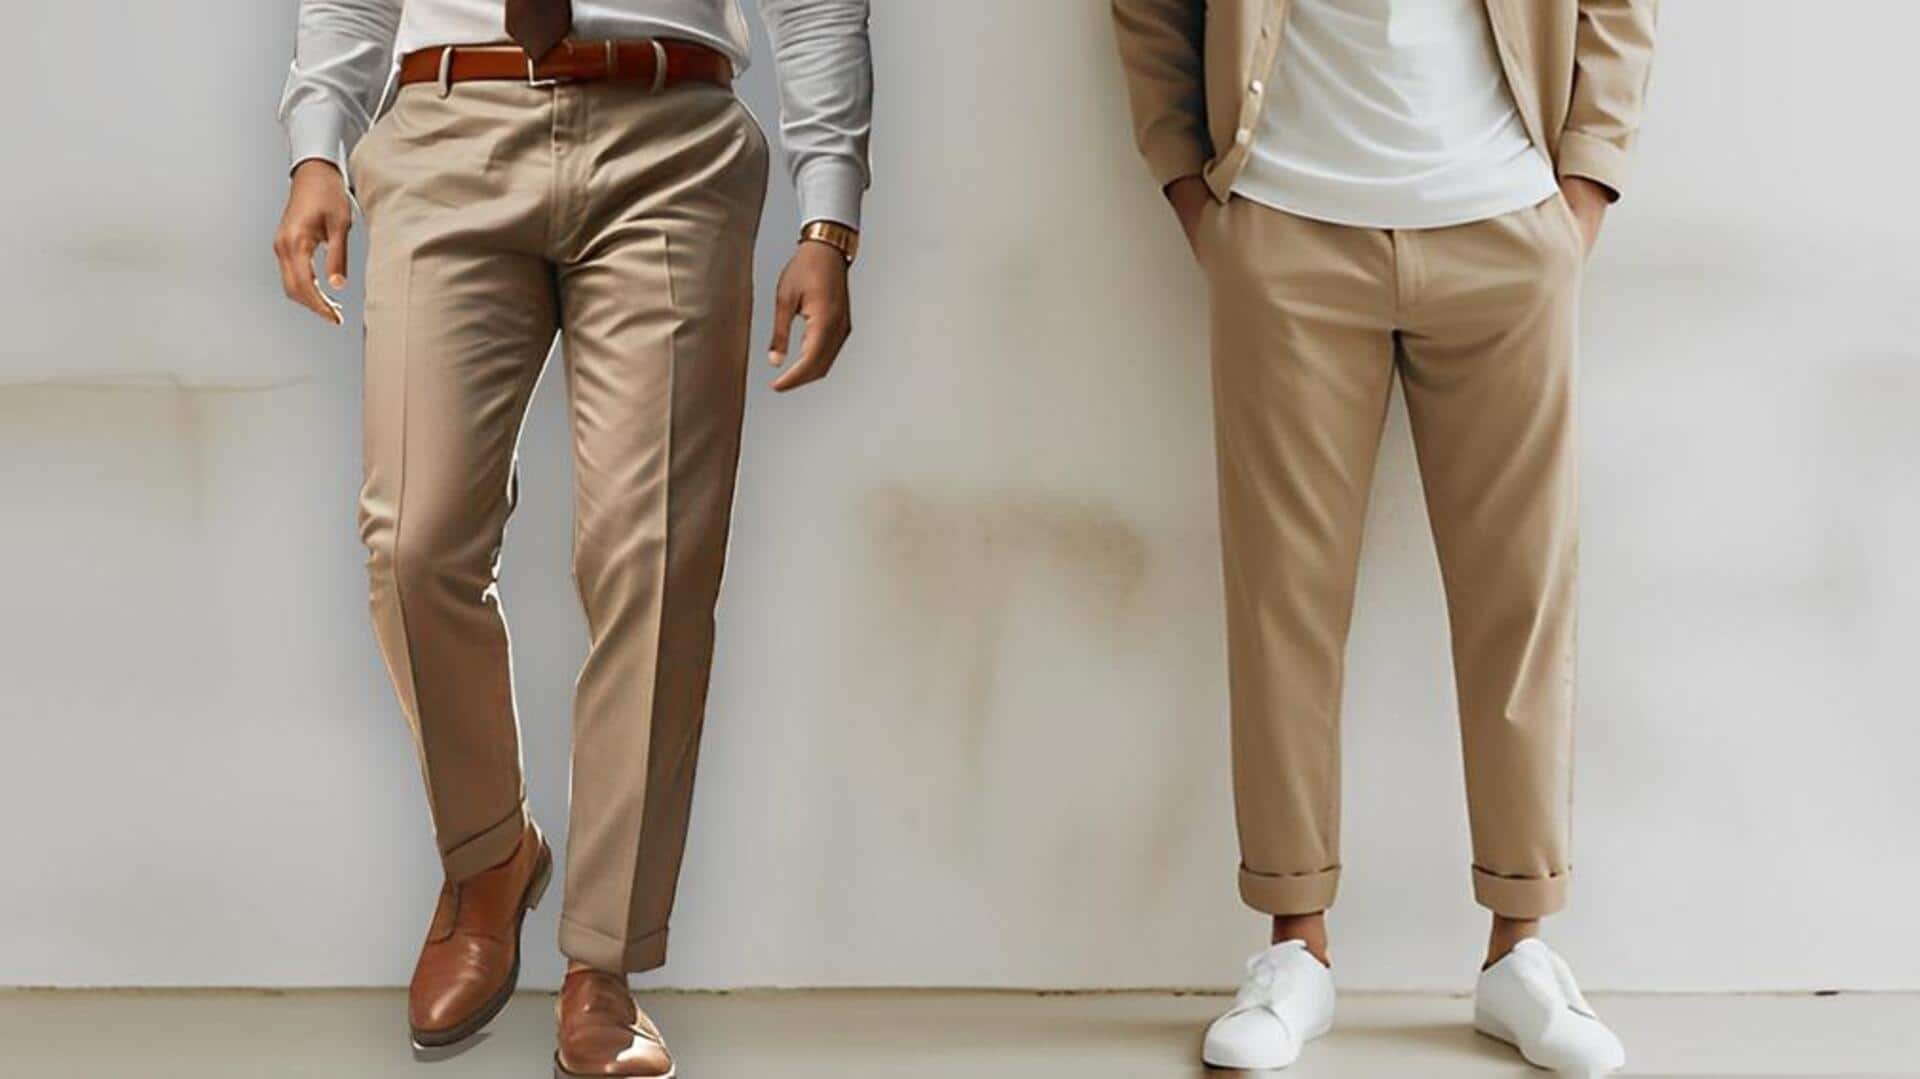 Here's how you can ace smart casual with chinos